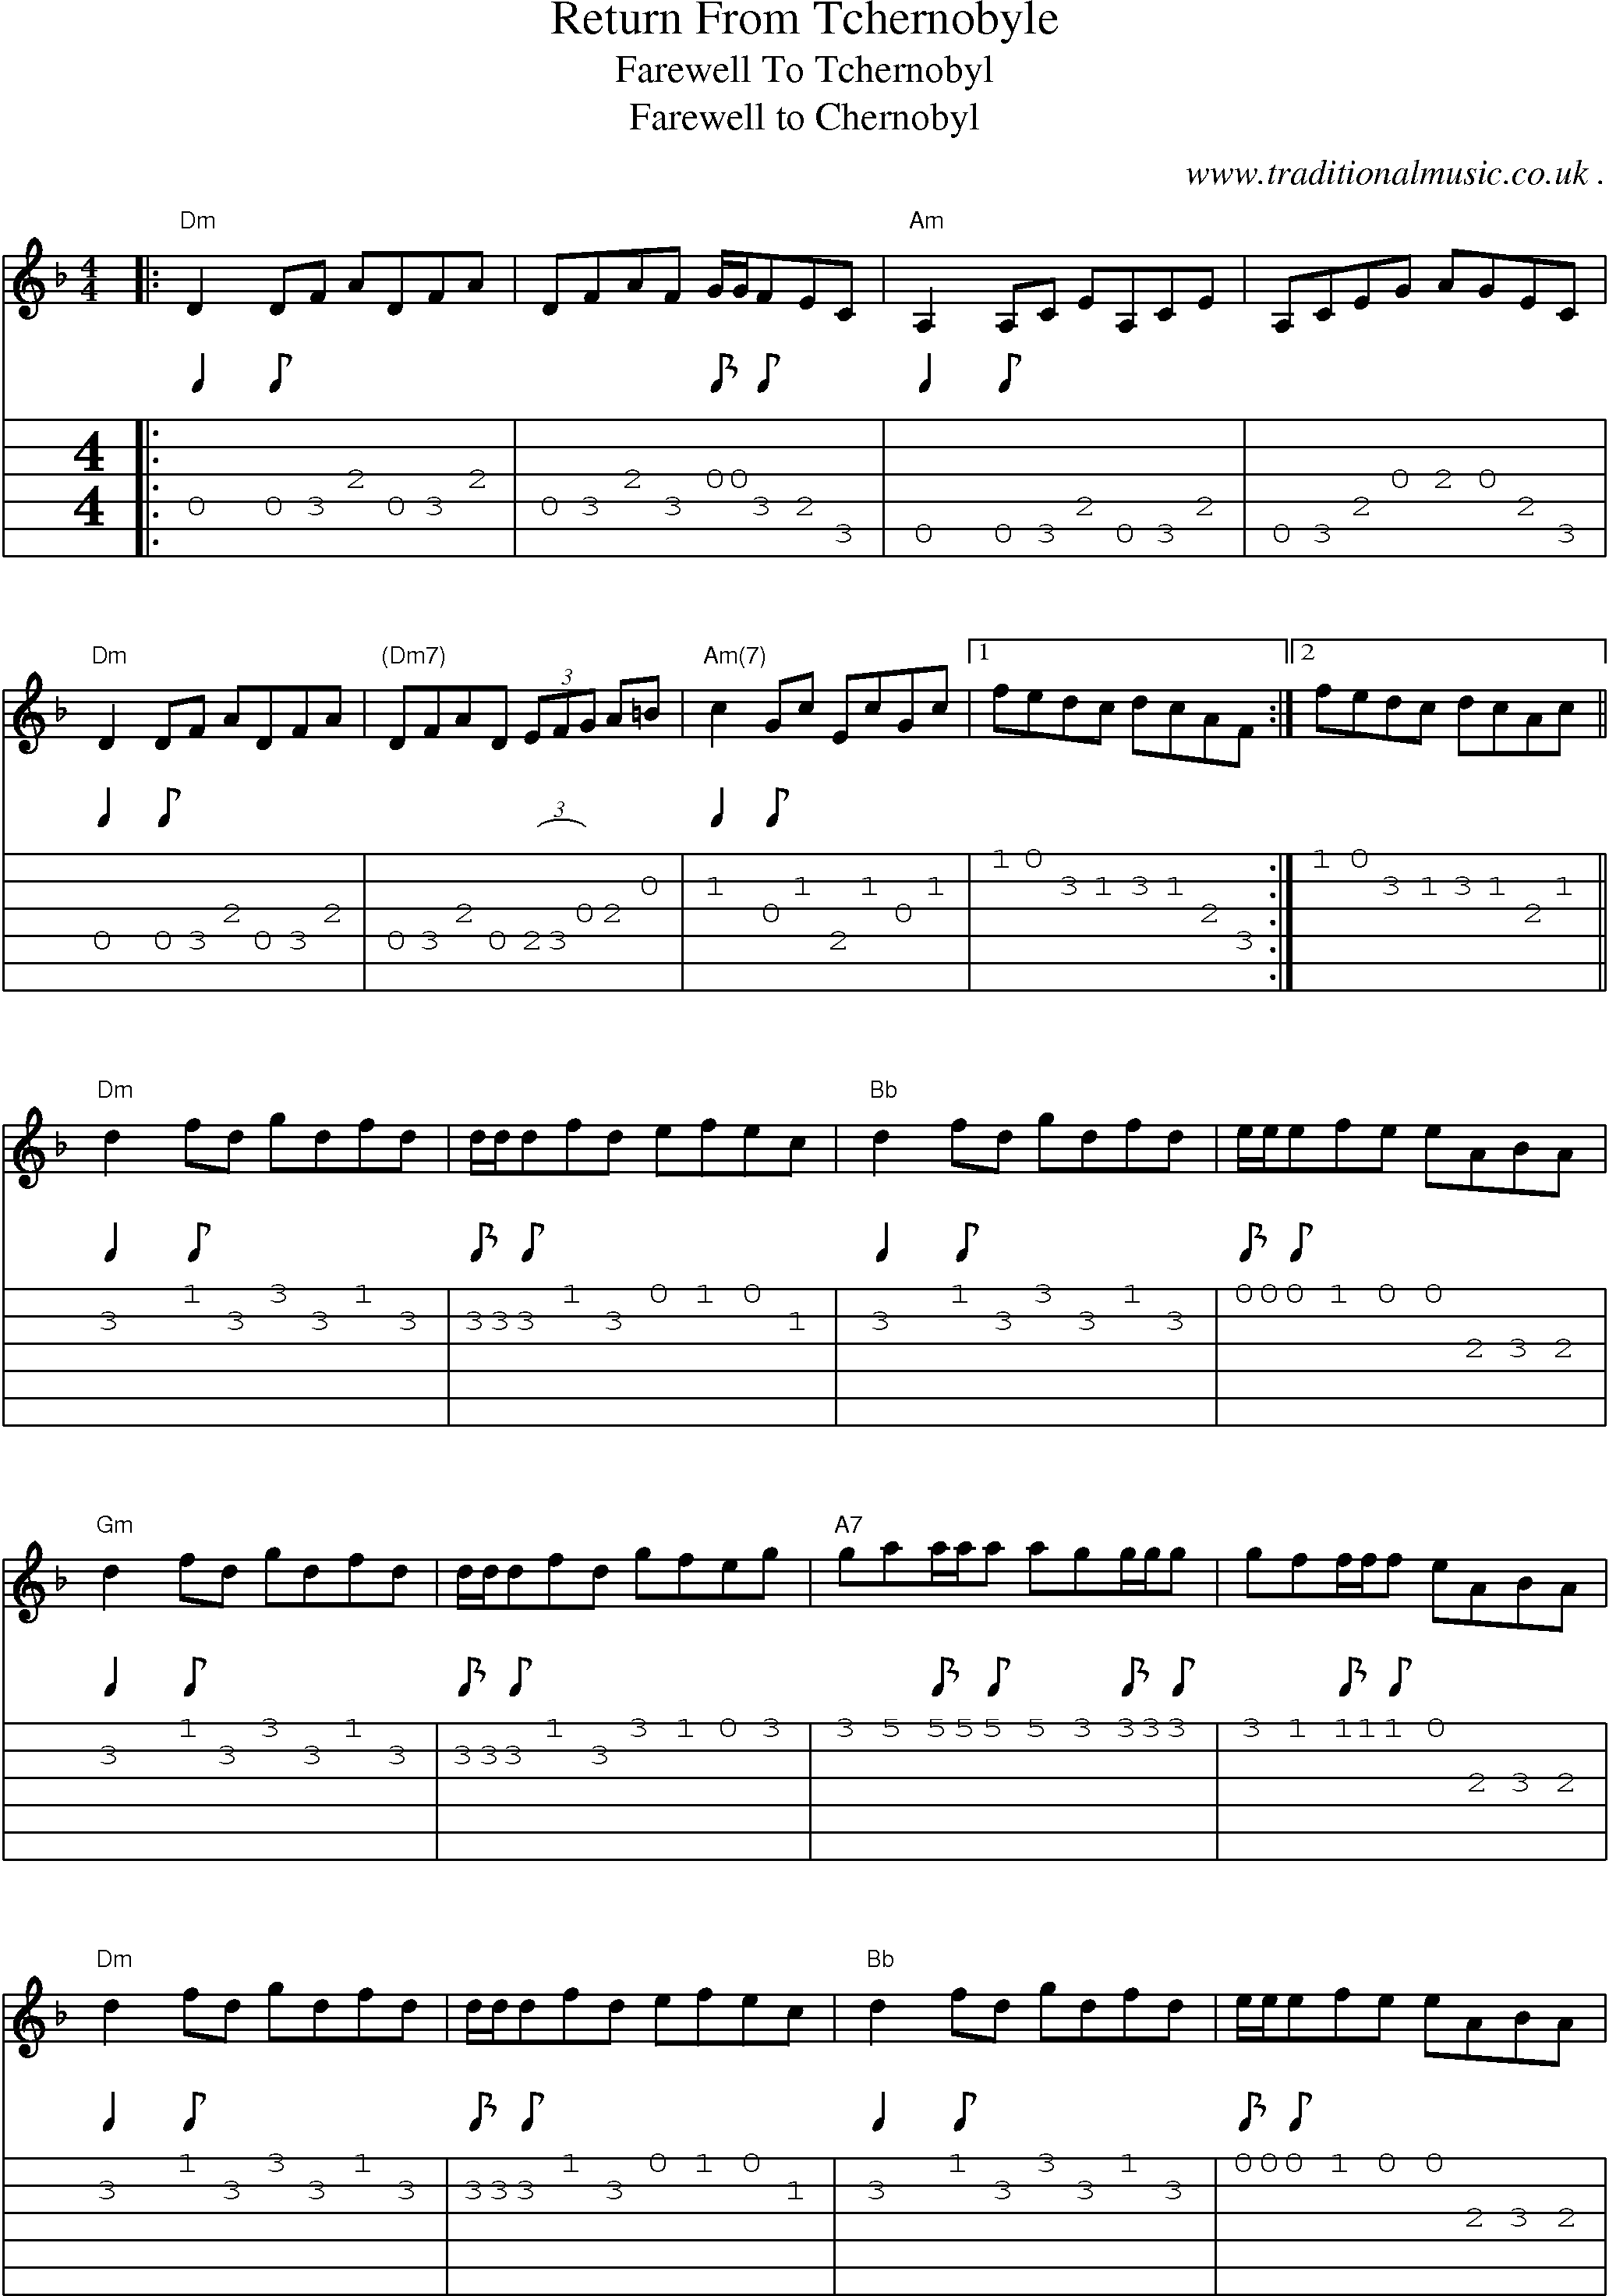 Music Score and Guitar Tabs for Return From Tchernobyle